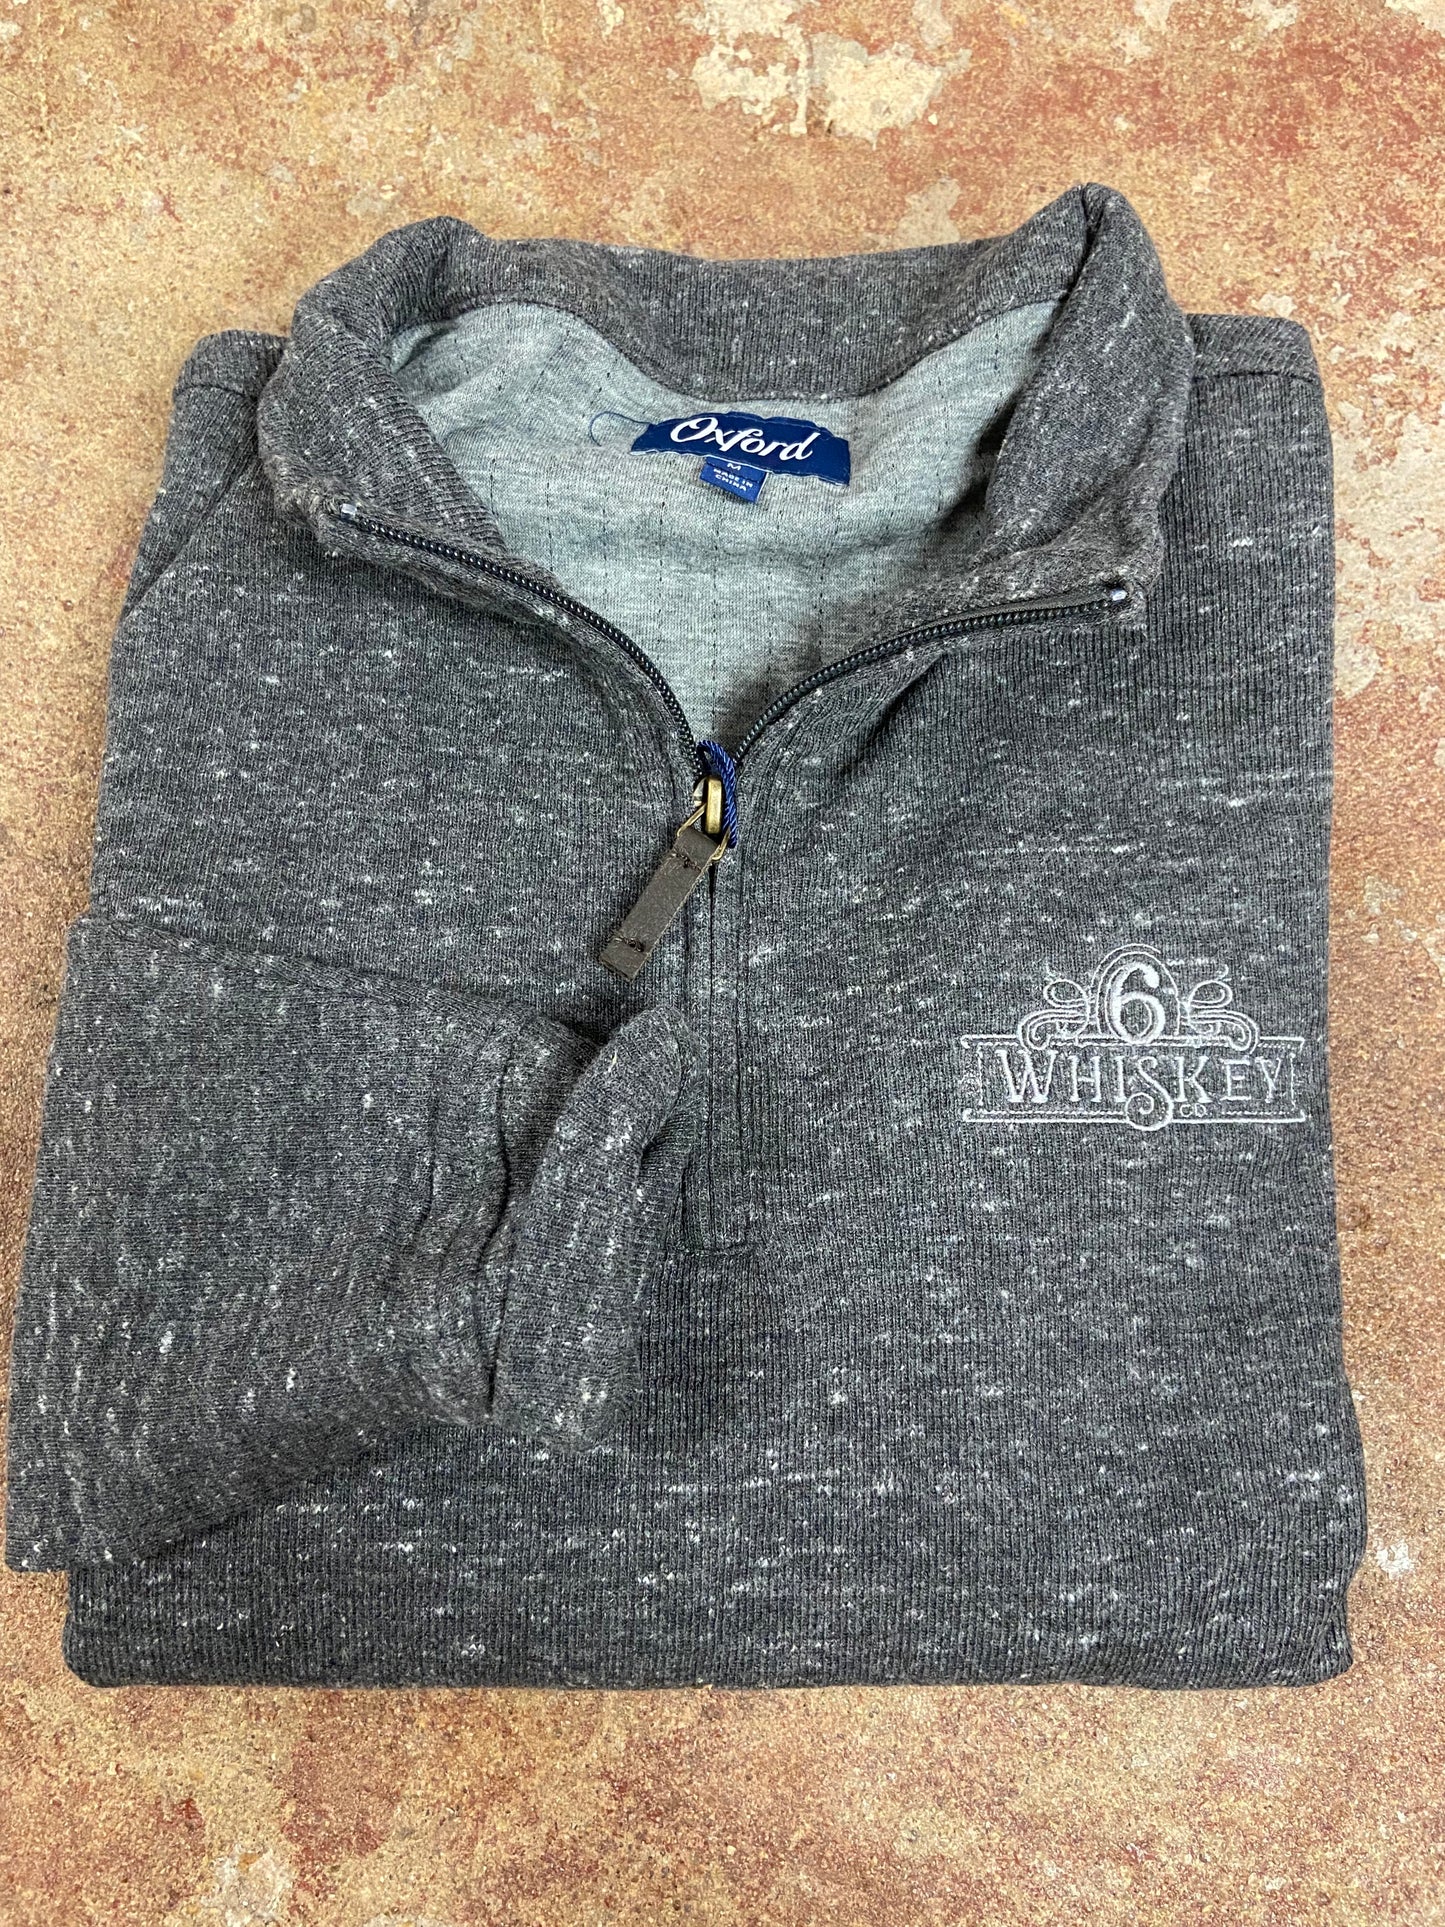 Oxford Crawford 1/4 Zip Fleece Pullover 6Whiskey Fall 2020 In black Heather 